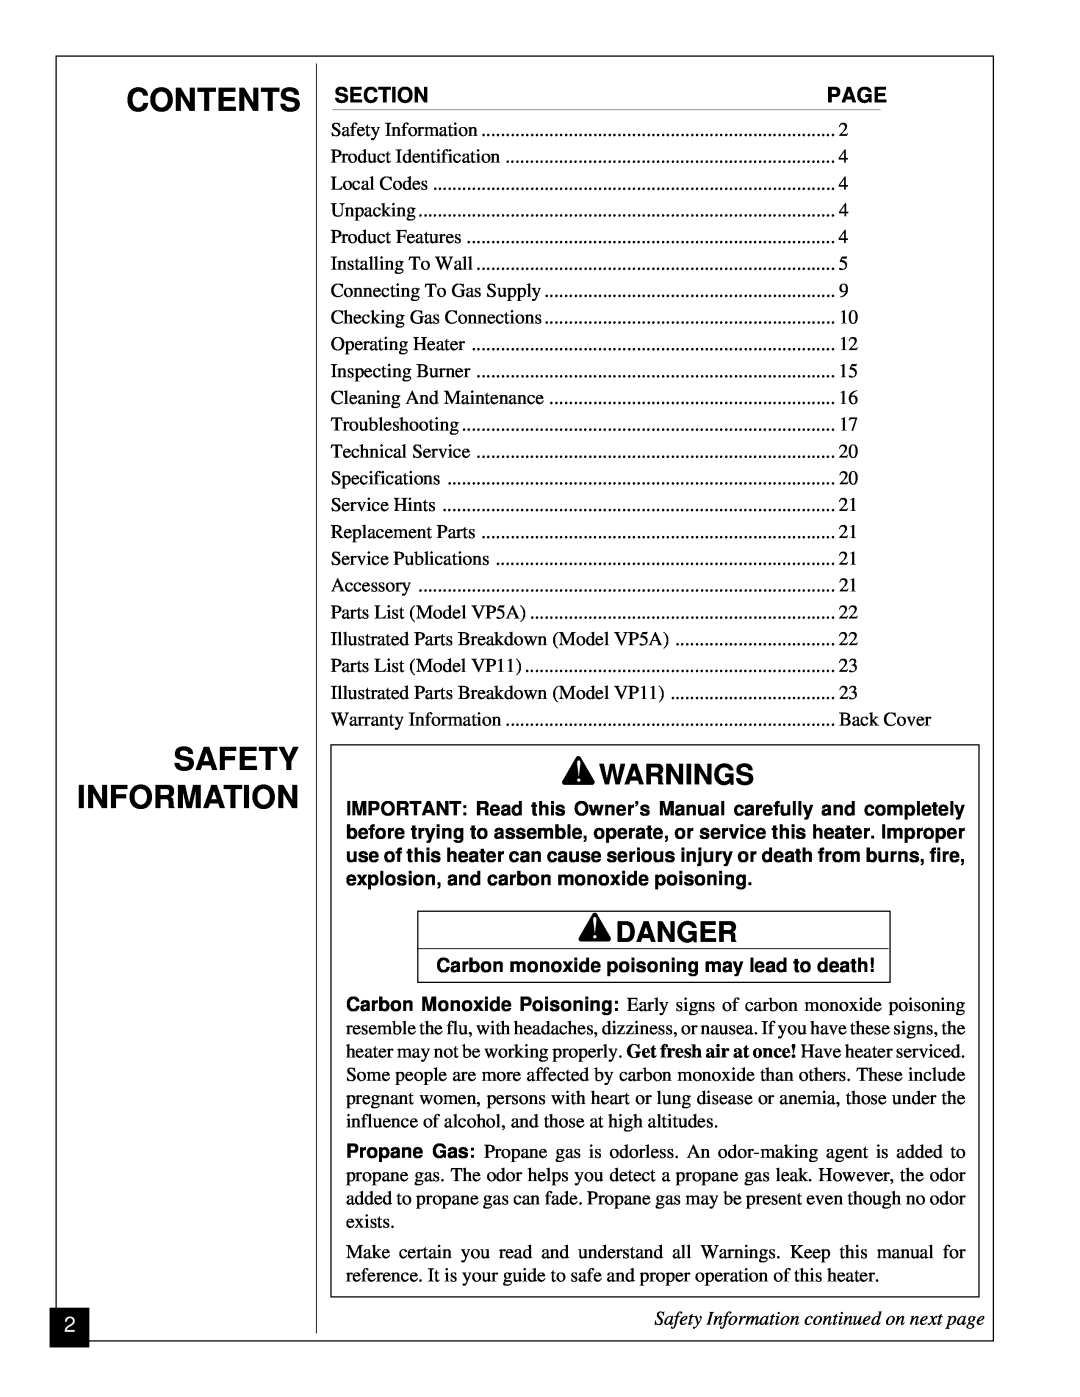 Desa VP5A, VP11 installation manual Contents Safety Information, Warnings, Danger, Safety Information continued on next page 